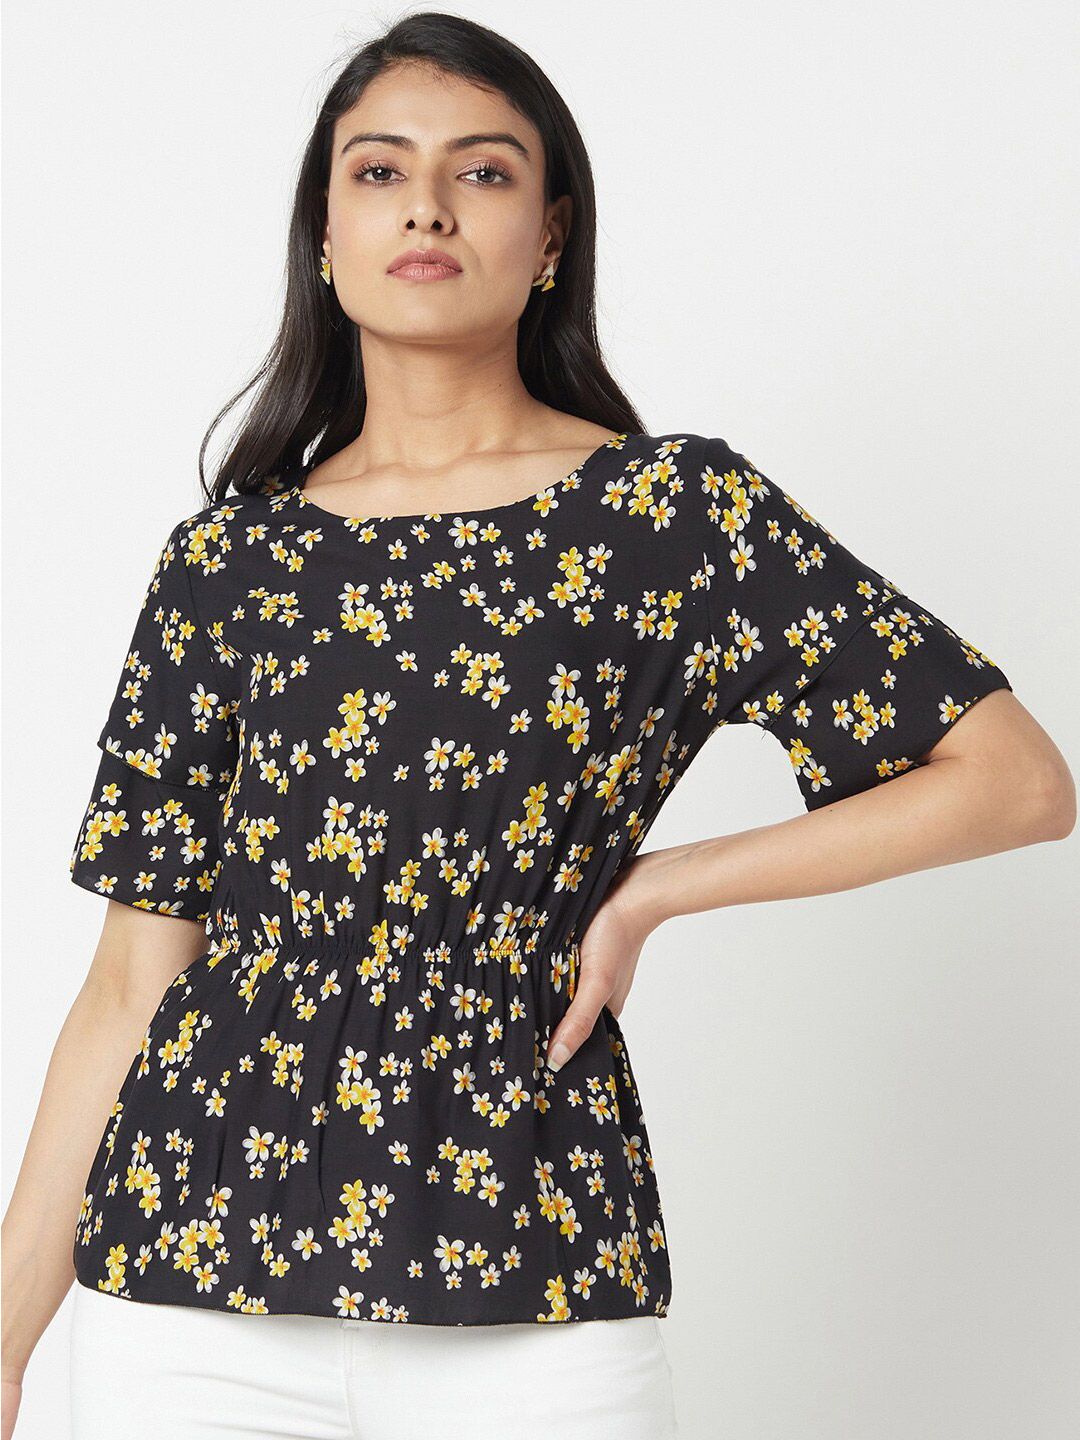 Miss Grace Floral Print Cinched Waist Top Price in India